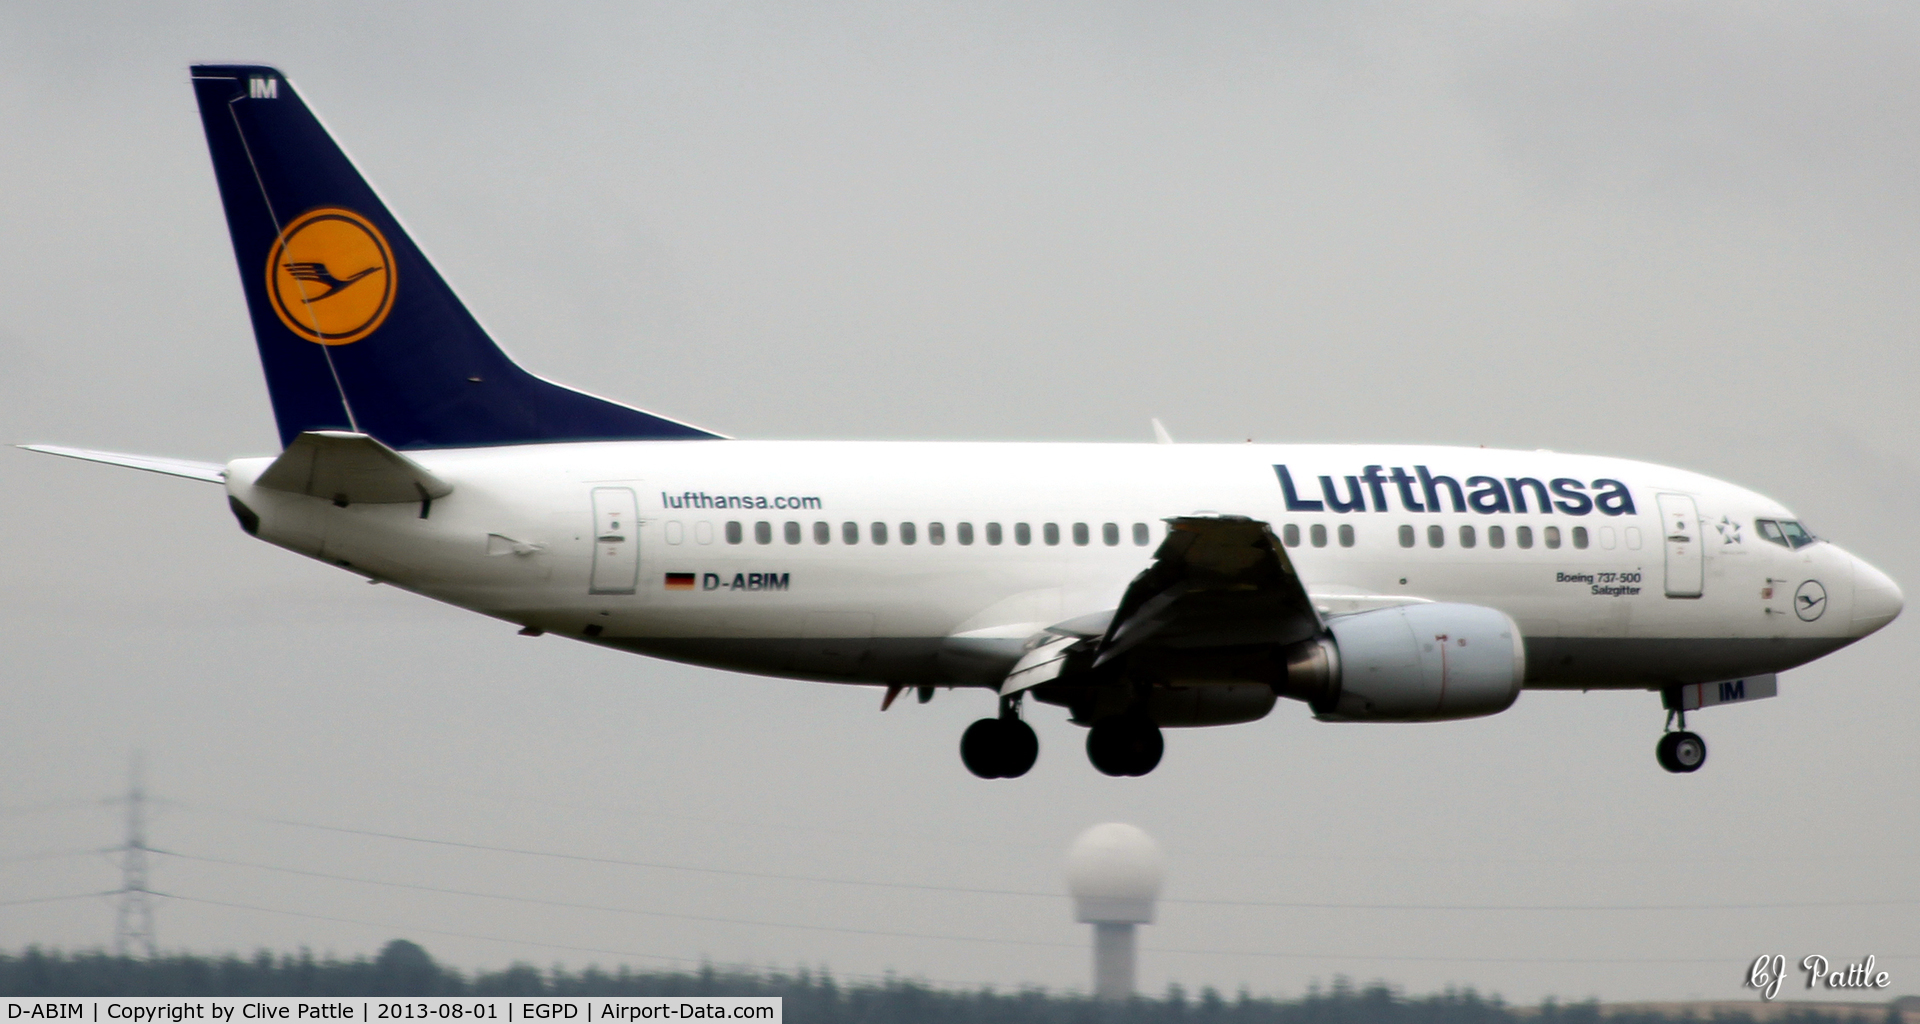 D-ABIM, 1991 Boeing 737-530 C/N 24937, Landing at Aberdeen EGPD - this aircraft was stored by Lufthansa in Oct 2013